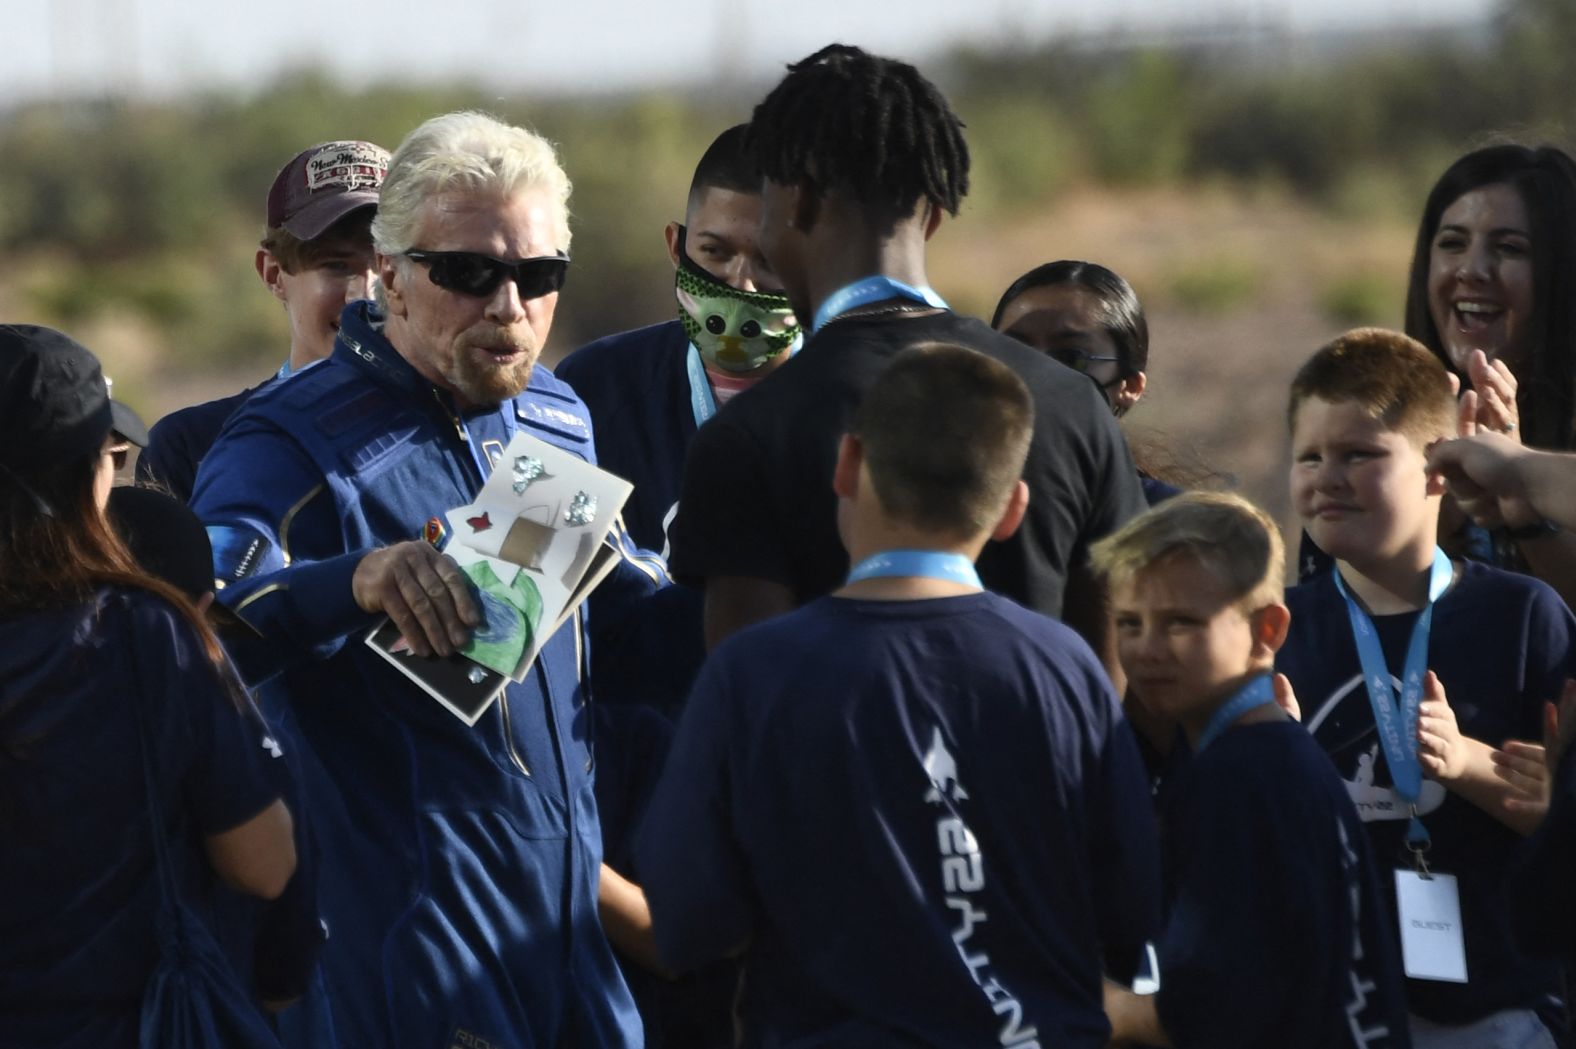 Richard Branson receives some cards from schoolchildren as he walks out ahead of the flight.